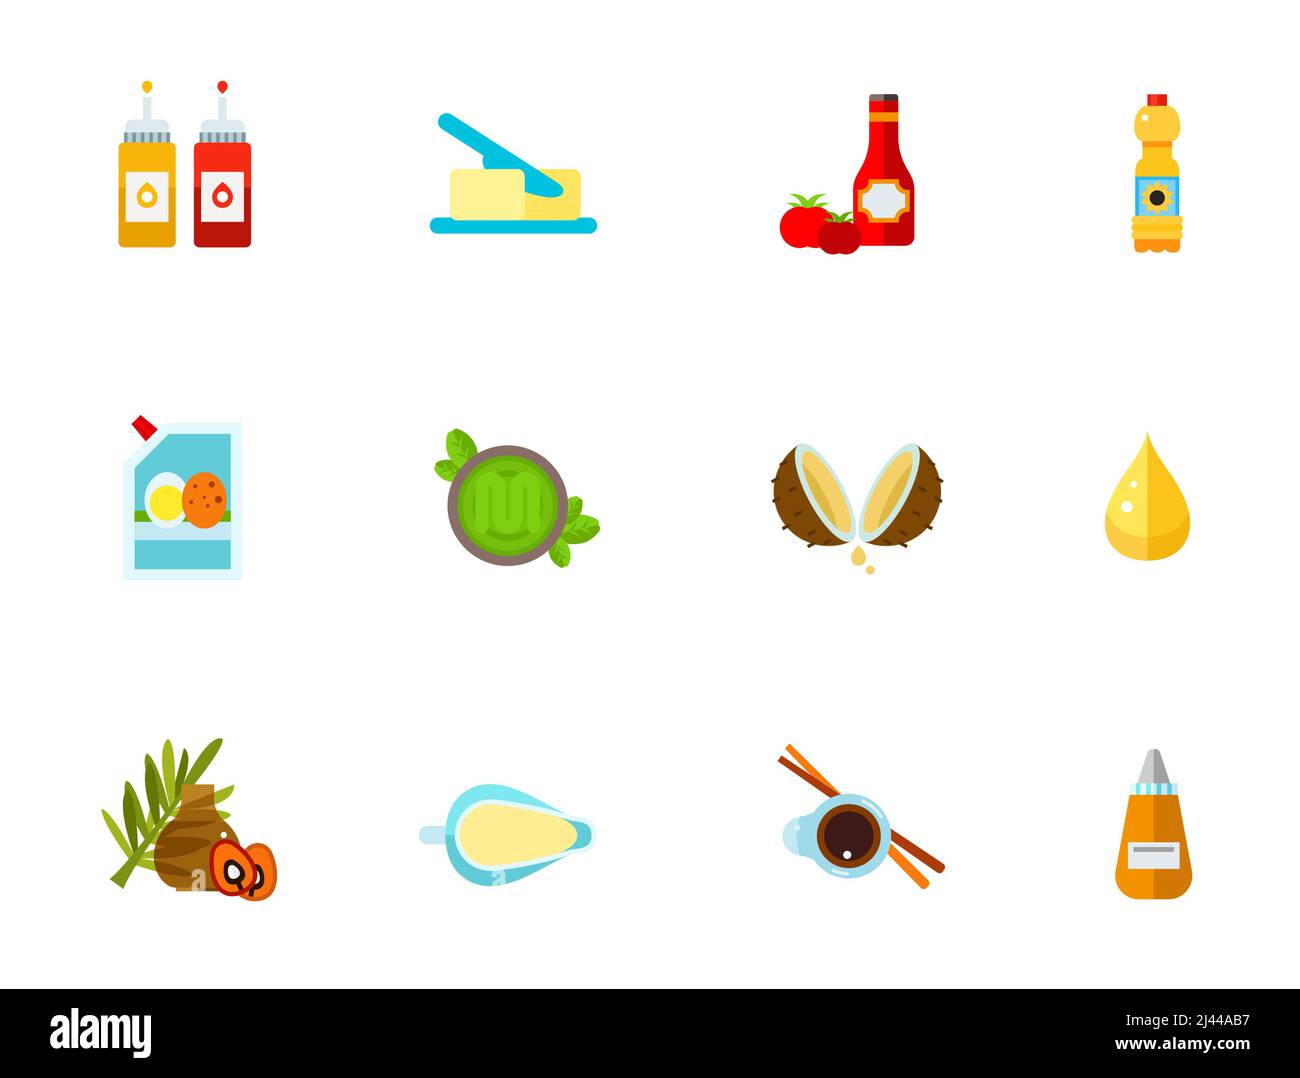 Condiments icon set. Ketchup And Mustard Bottles Butter Ketchup And Tomatoes Cooking Oil Bottle Mayonnaise In Bag Green Pesto Sauce Coconut Oil Drop P Stock Vector